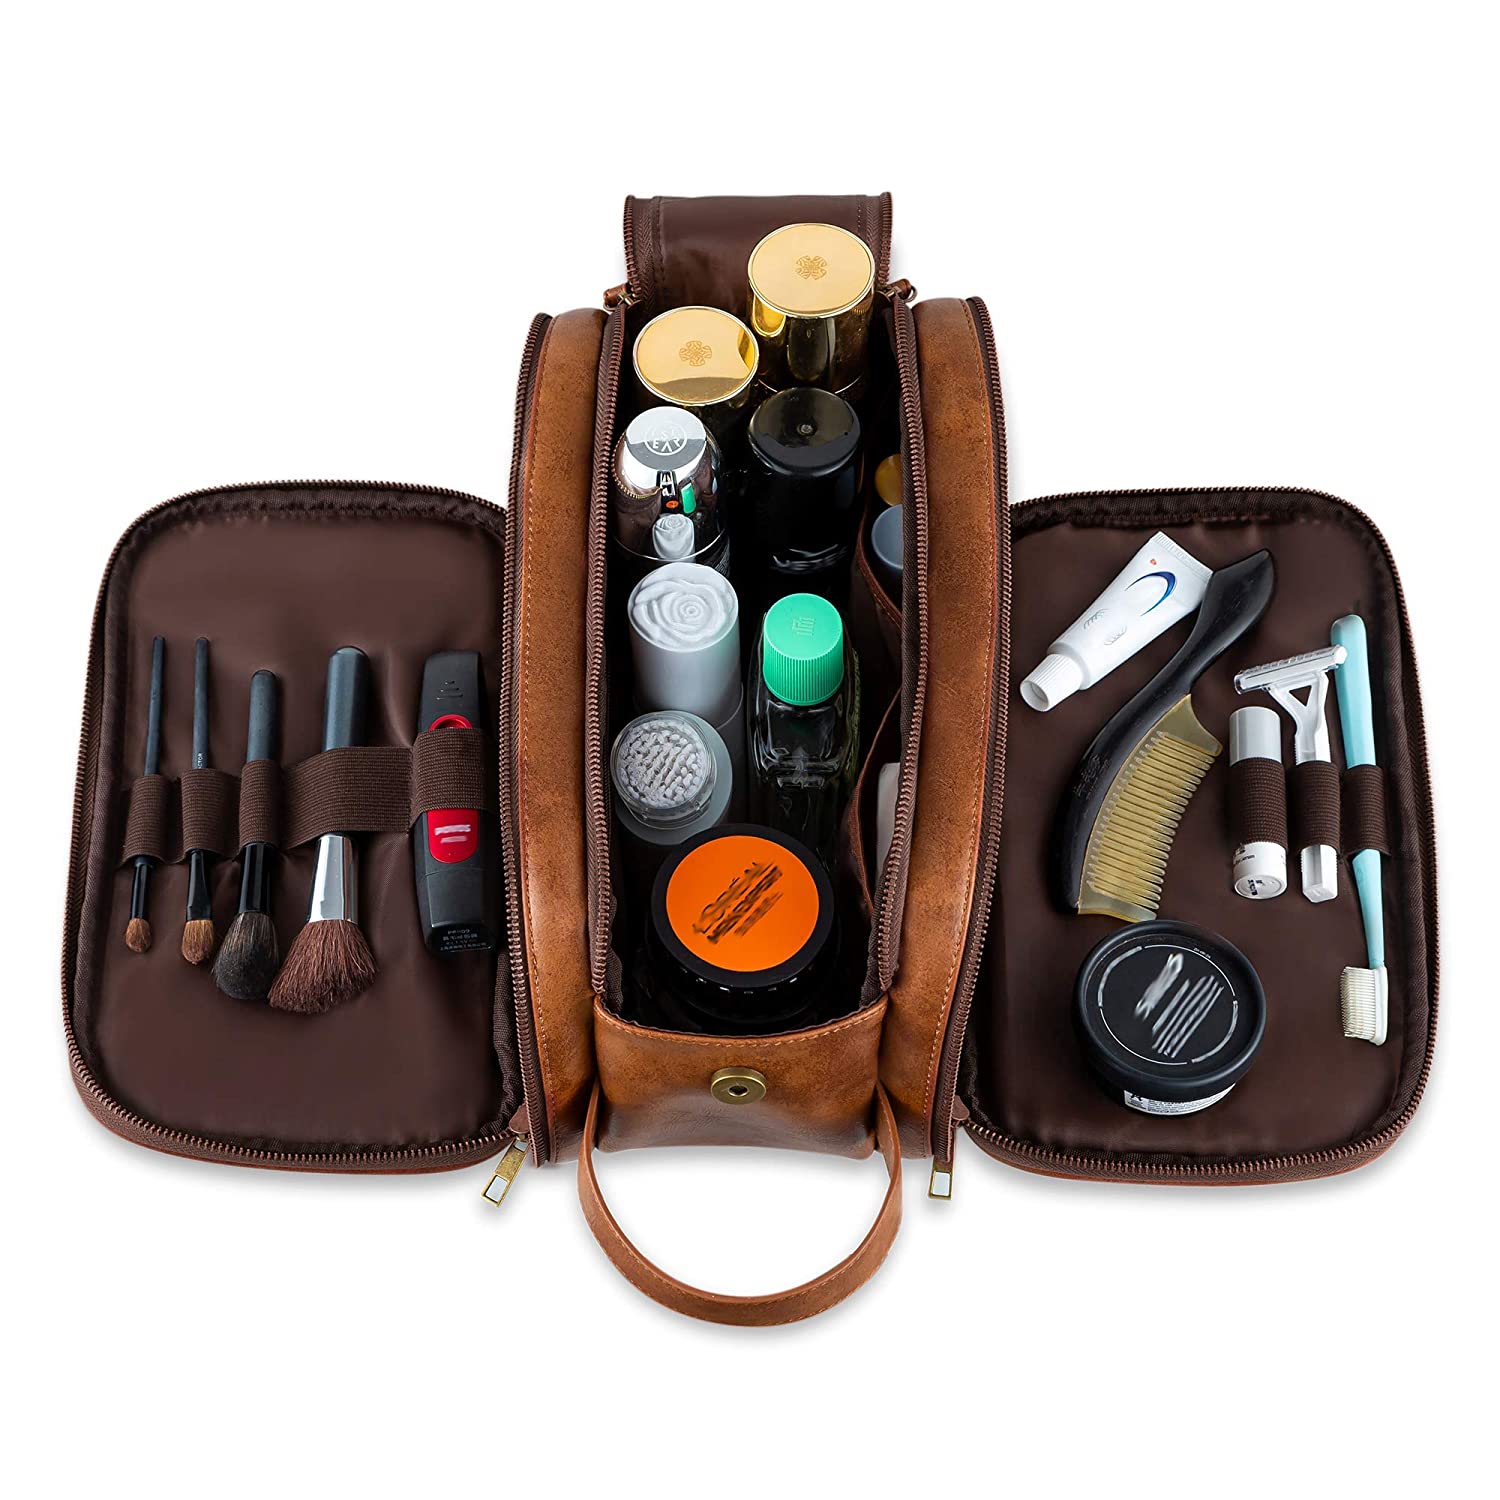 5 Best Men's Toiletry Bags of 2022 for Style, Traveling, and Organizing